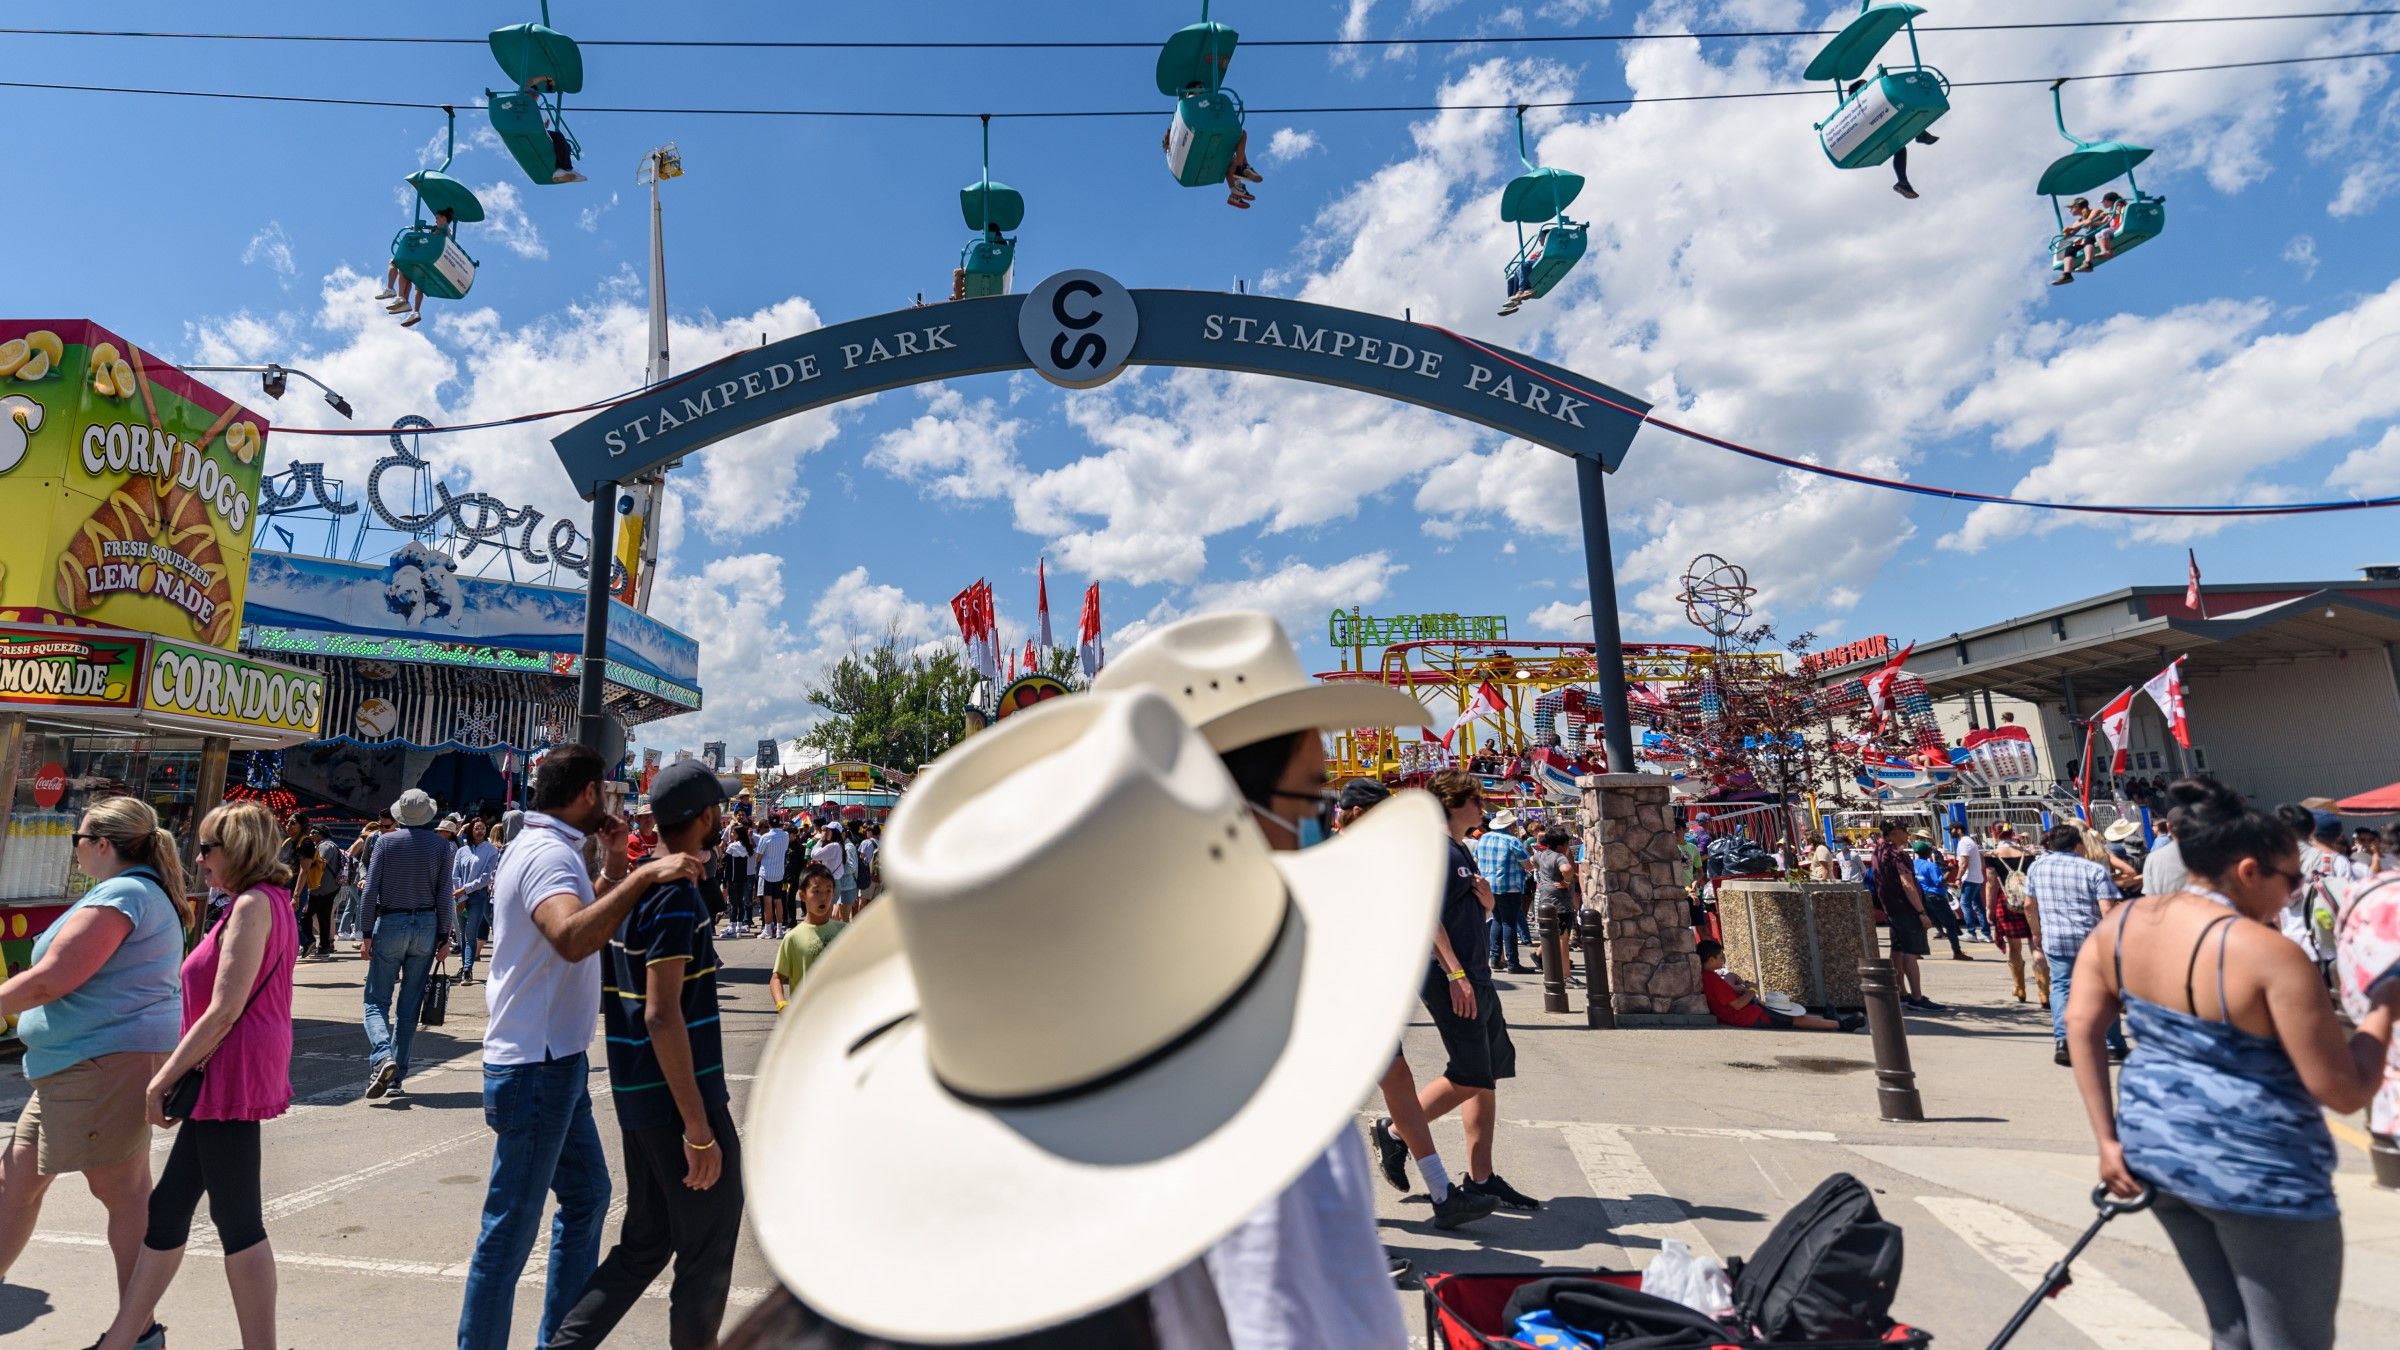 The Calgary Stampede adds spirit and an economic boost to the city